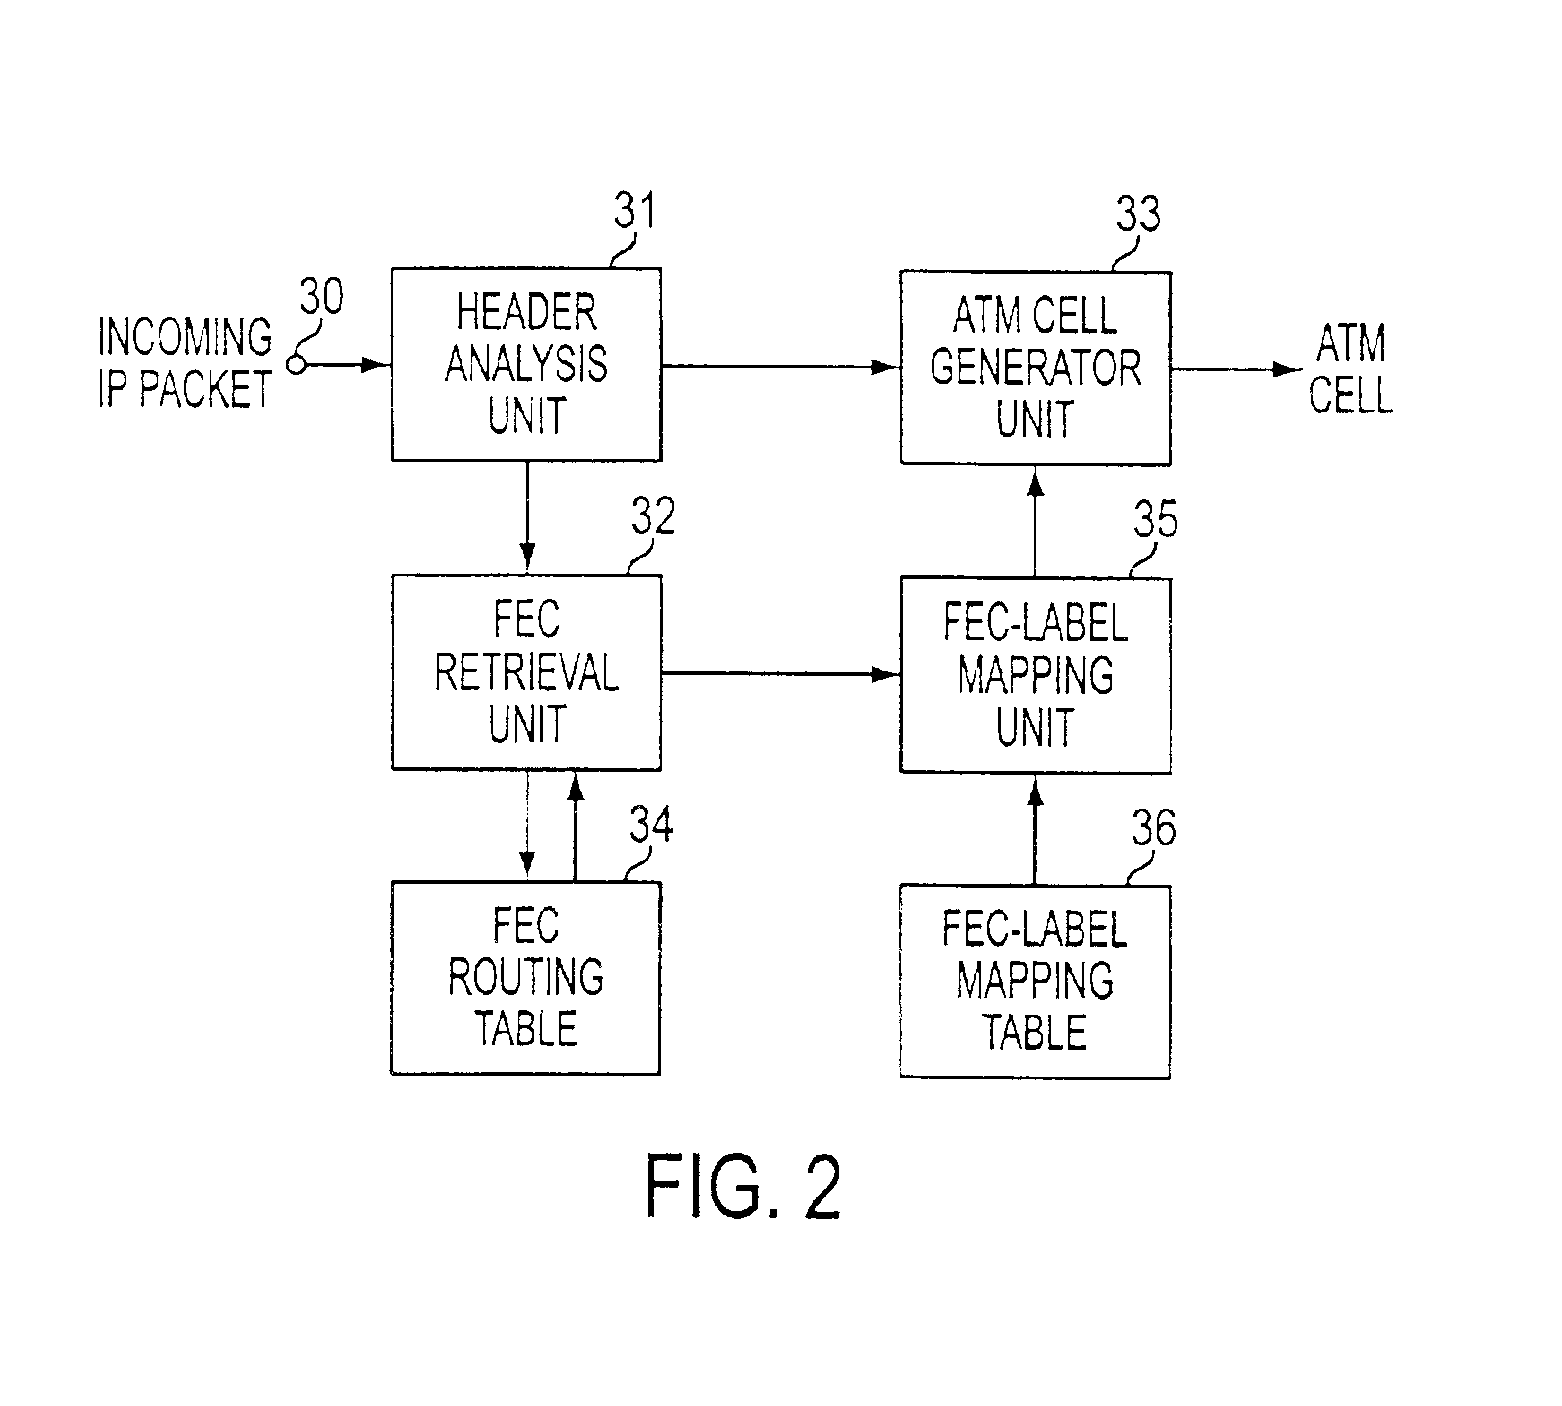 Method and apparatus for selection of paths on a communication network